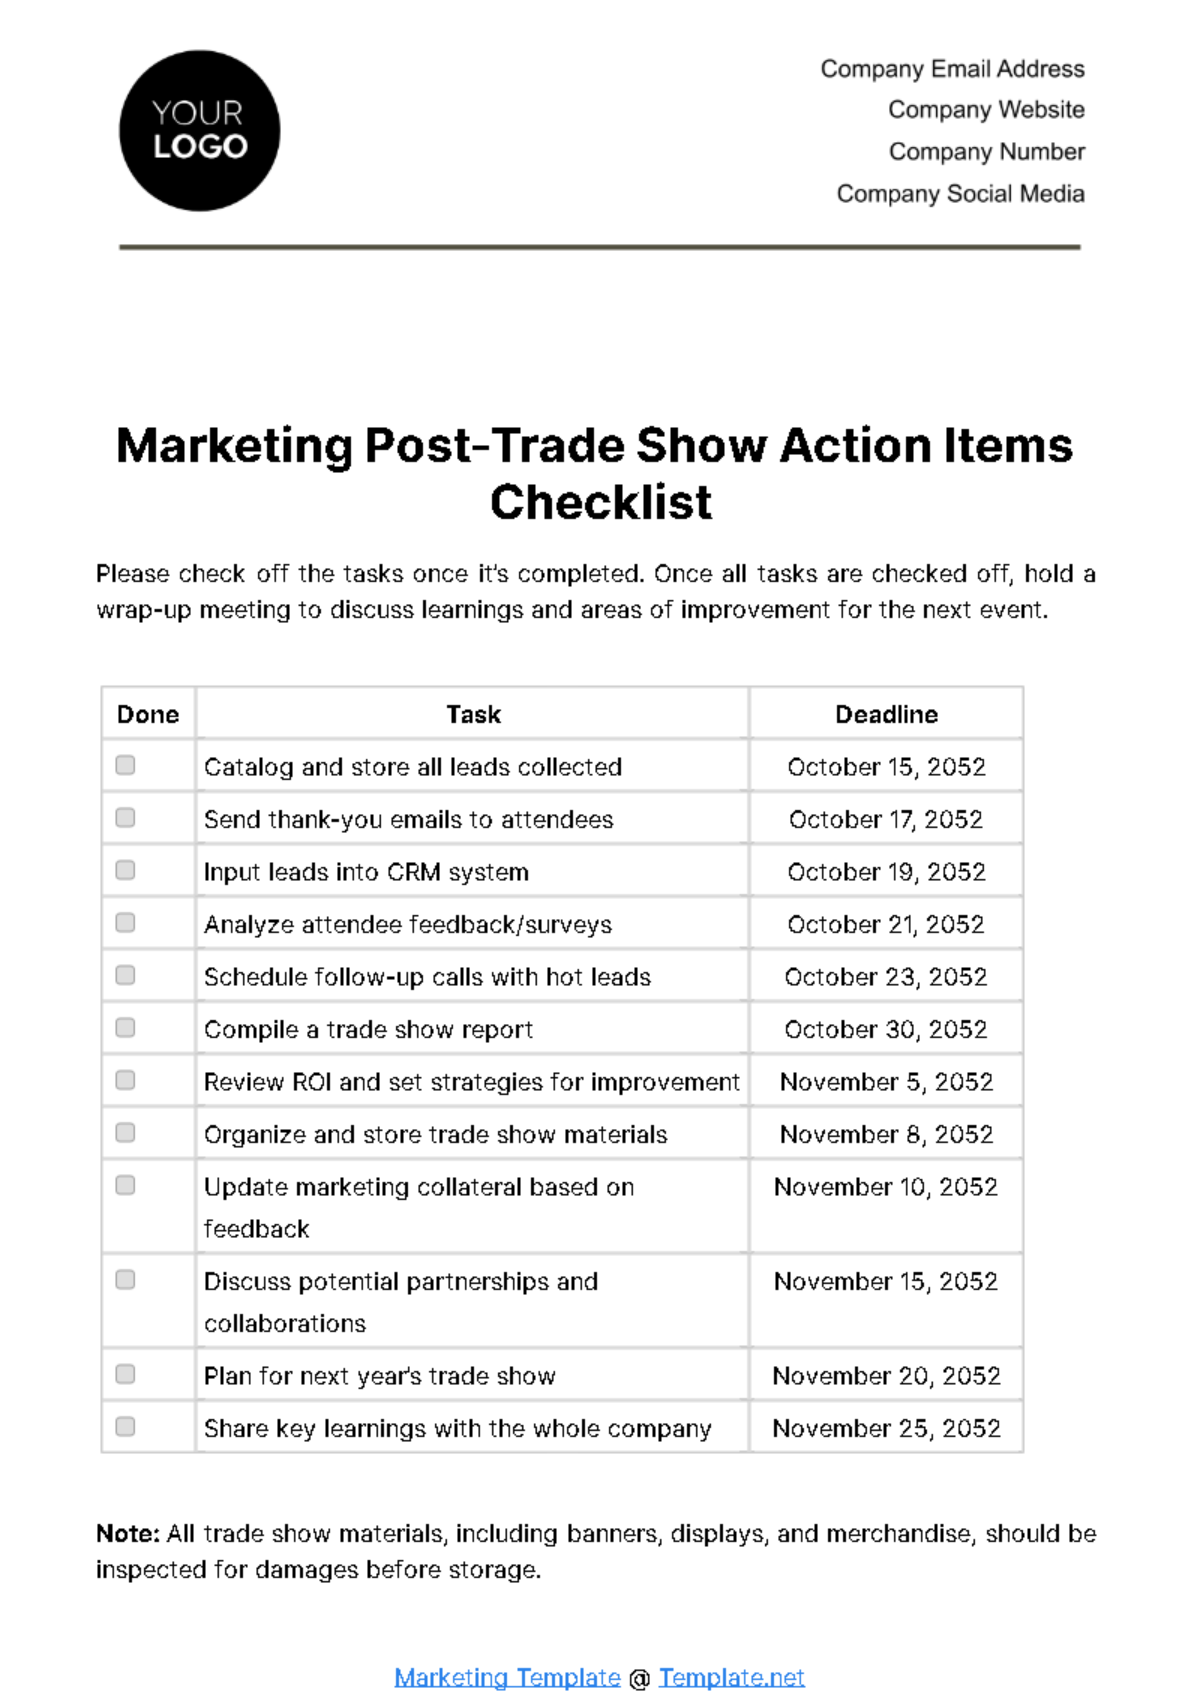 Free Marketing Post-Trade Show Action Items Checklist Template